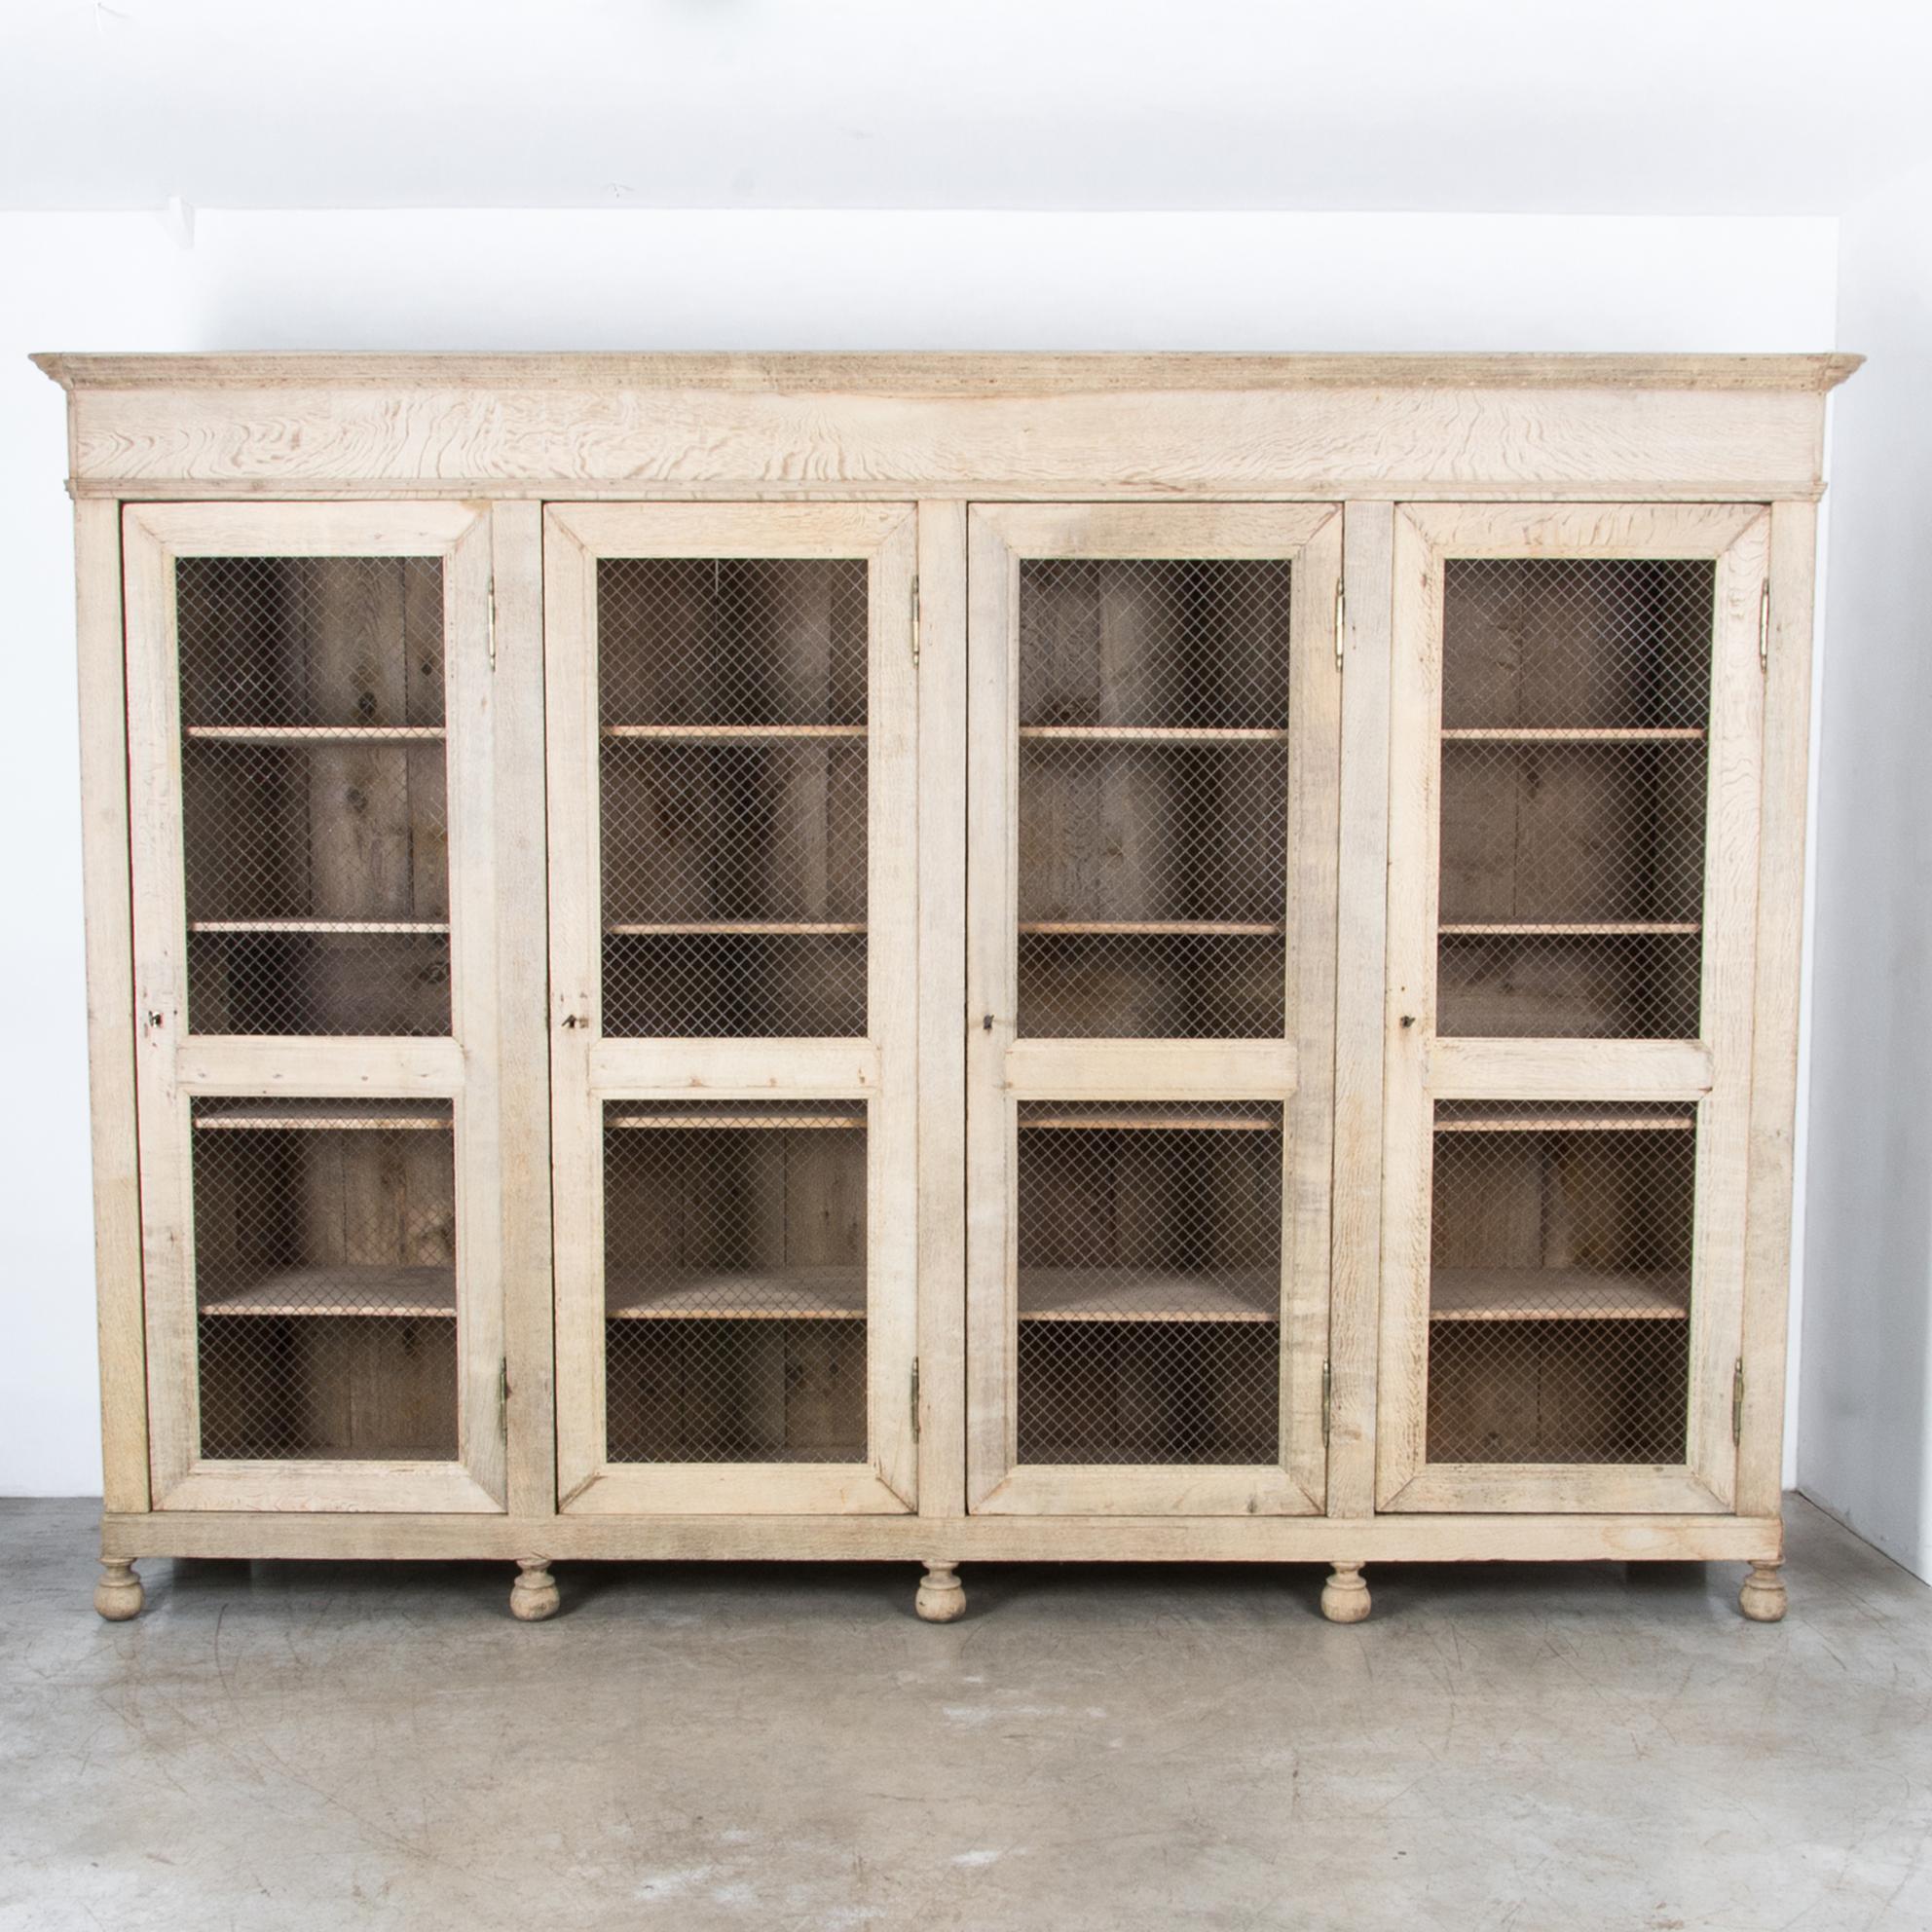 A distinctive storage piece from France, circa 1880. At nearly twelve feet, this four door cabinet is constructed in oak, with metal mesh screen doors. Resting on turned round feet, with a tall crown moulding, this piece features a distinctive mix